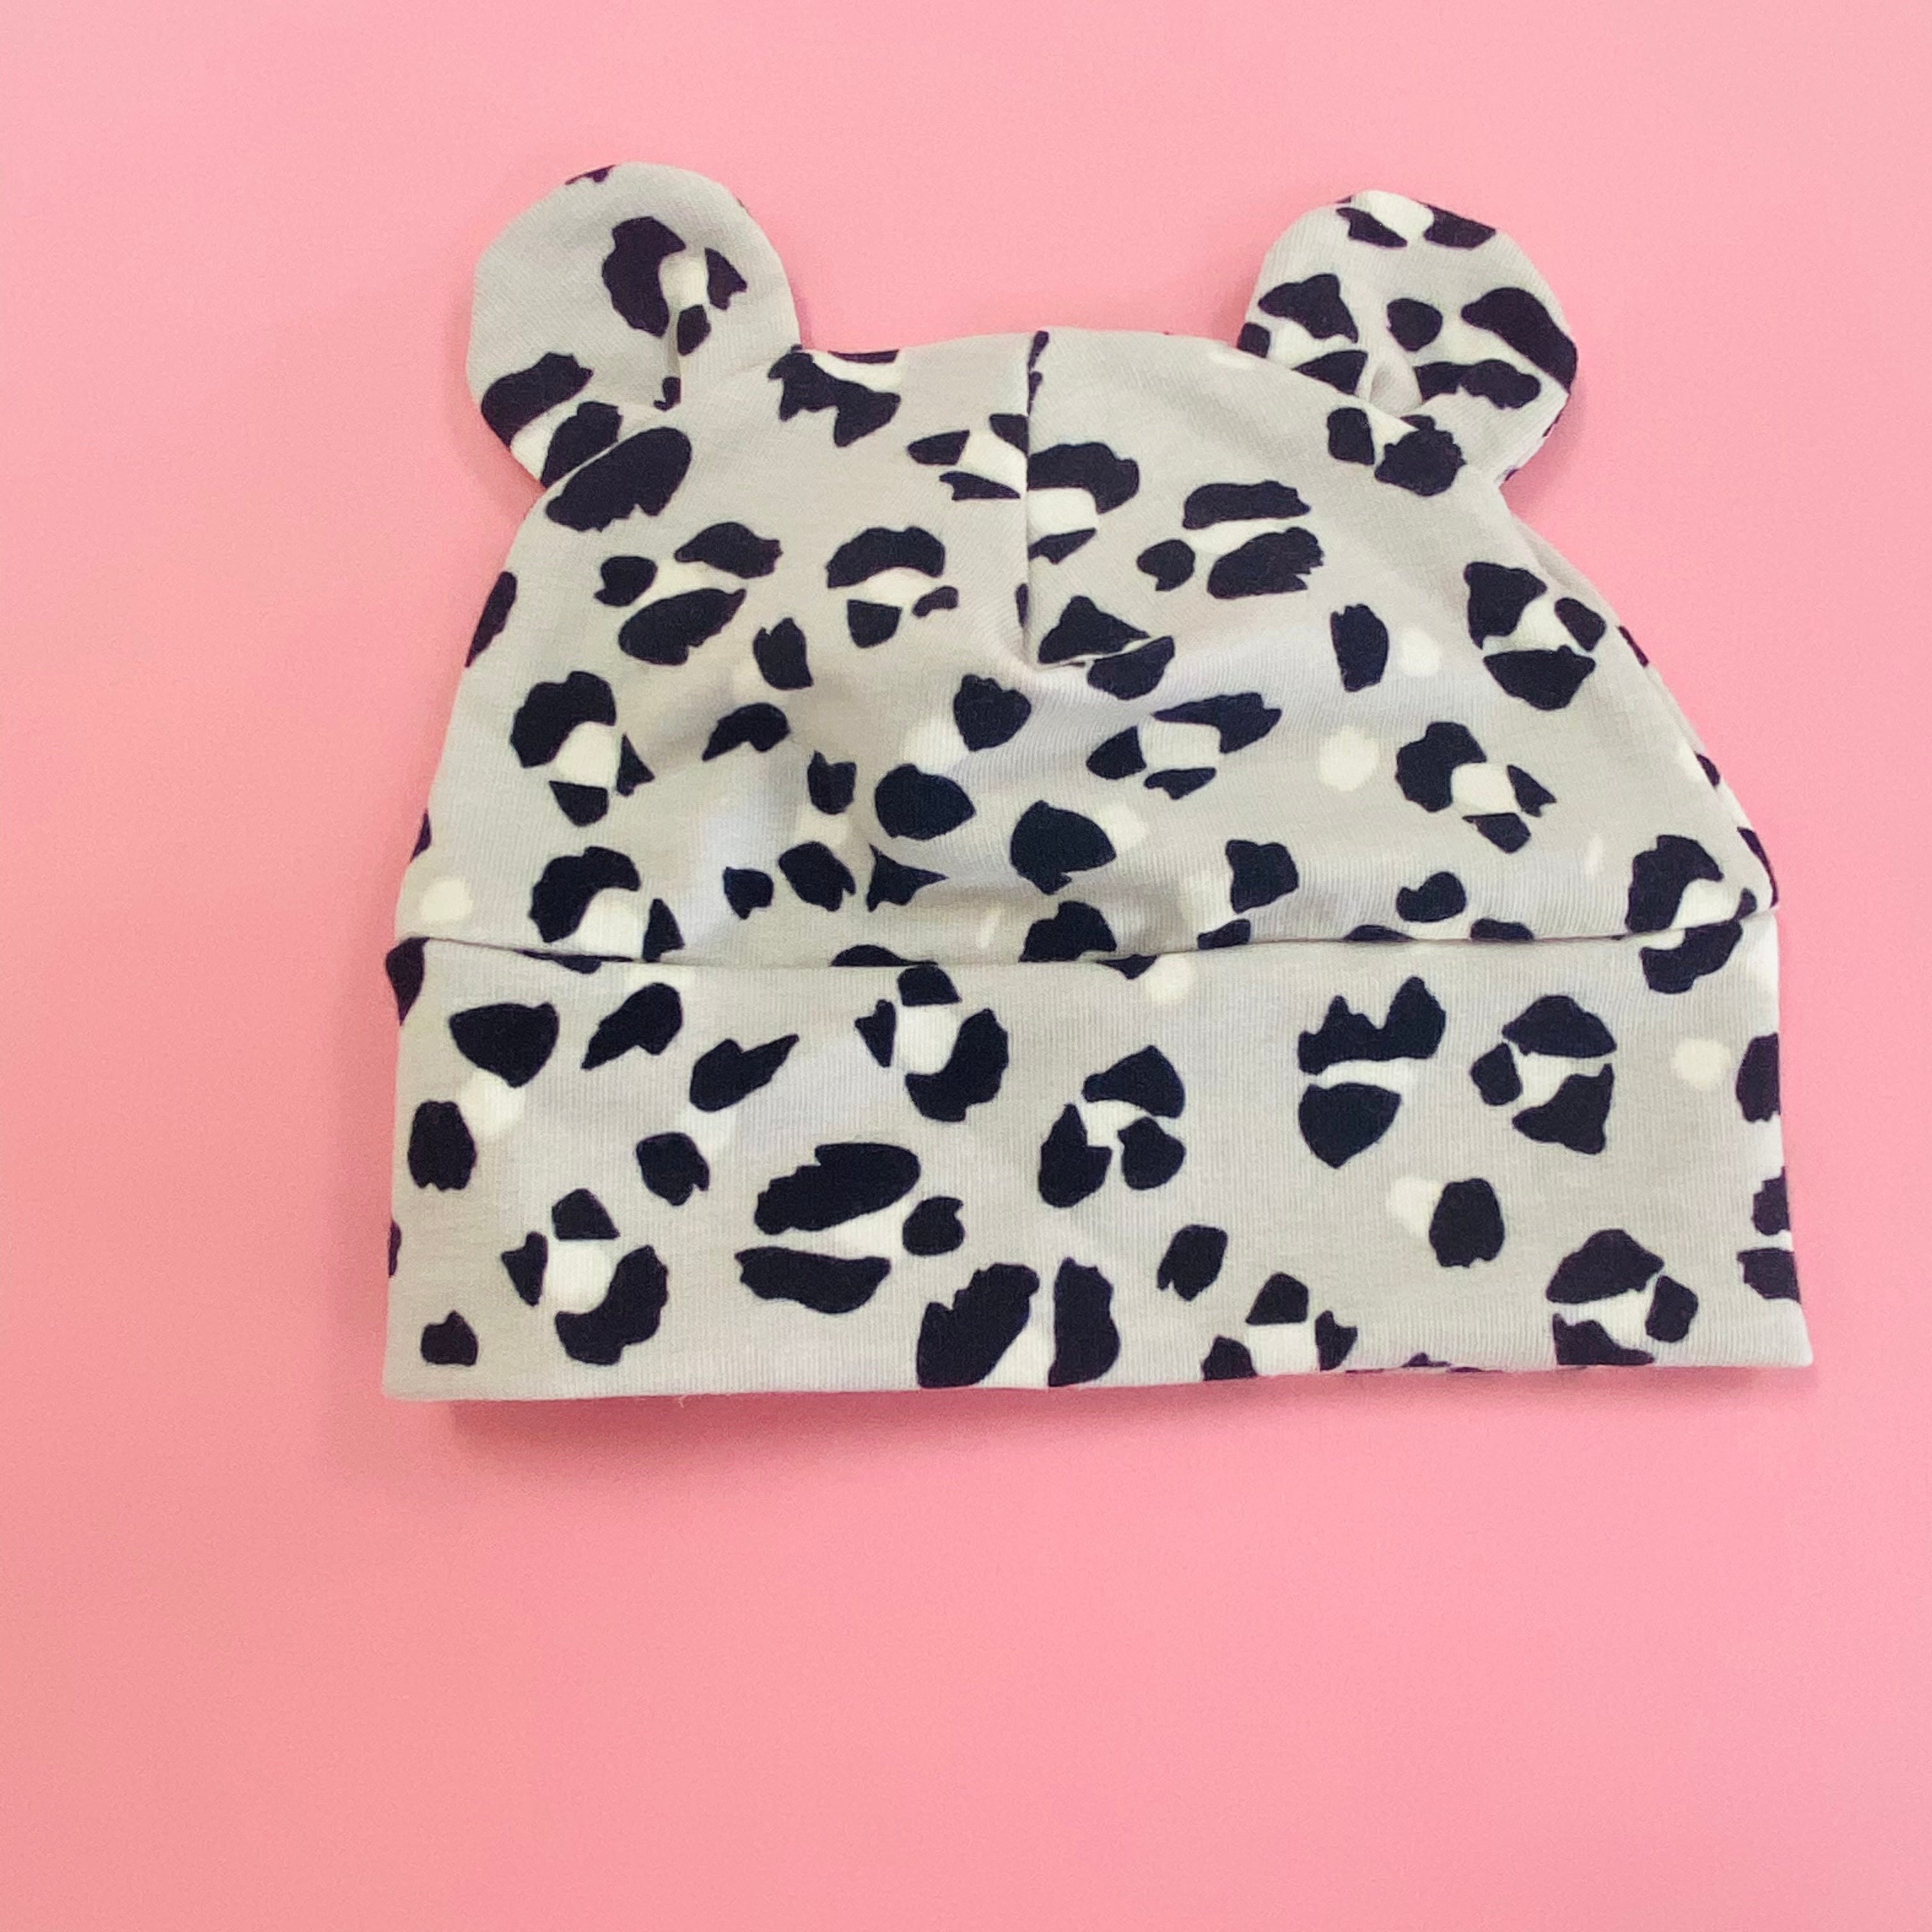 Eddie & Bee organic cotton Baby hat with ears  in Grey " Snow Leopard spot" print.